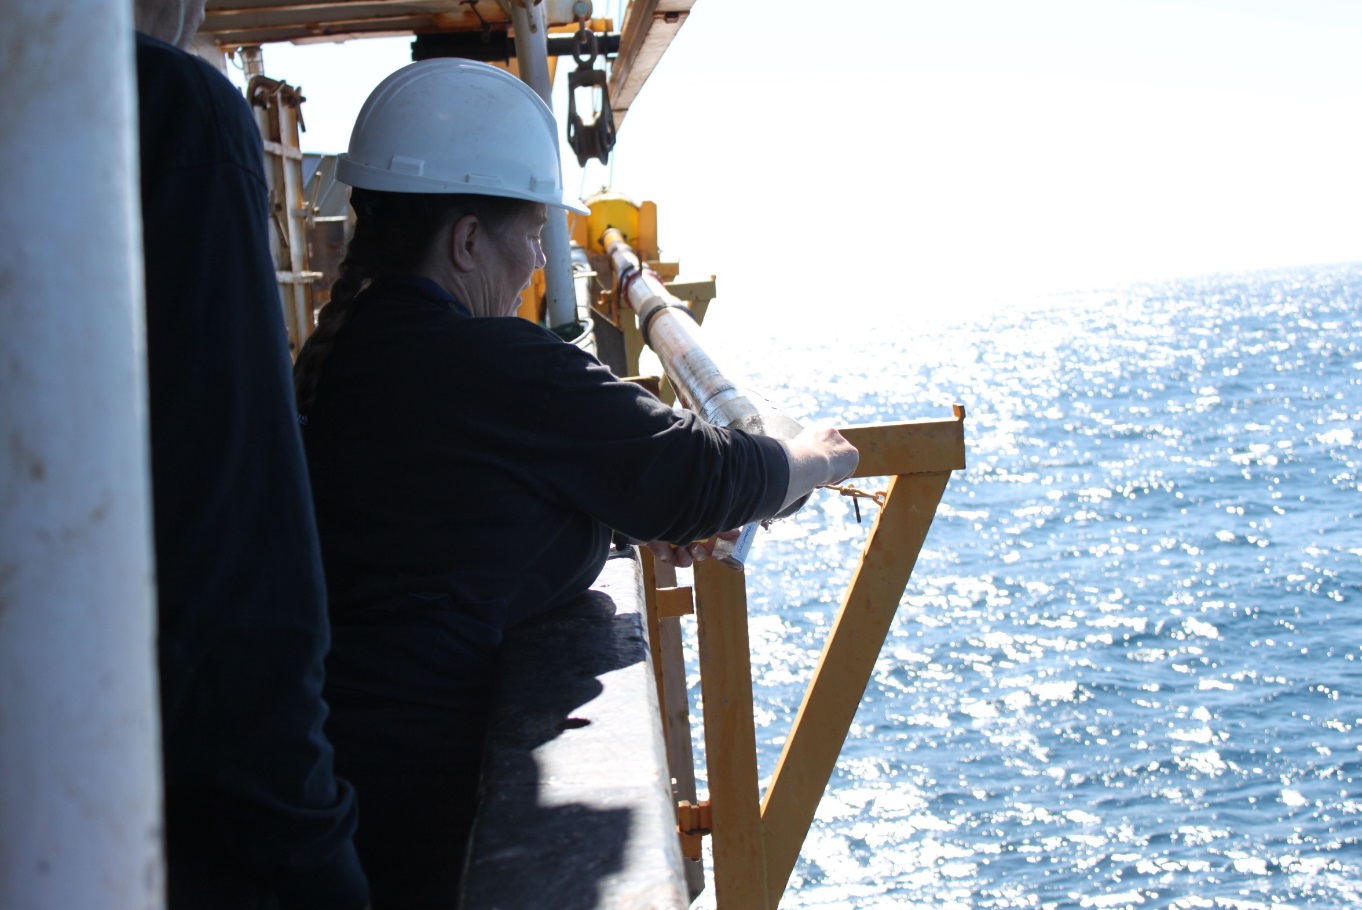 The GSC Atlantic’s Kate Jarrett subsampling the base of a marine sediment core onboard the CCGS Hudson.